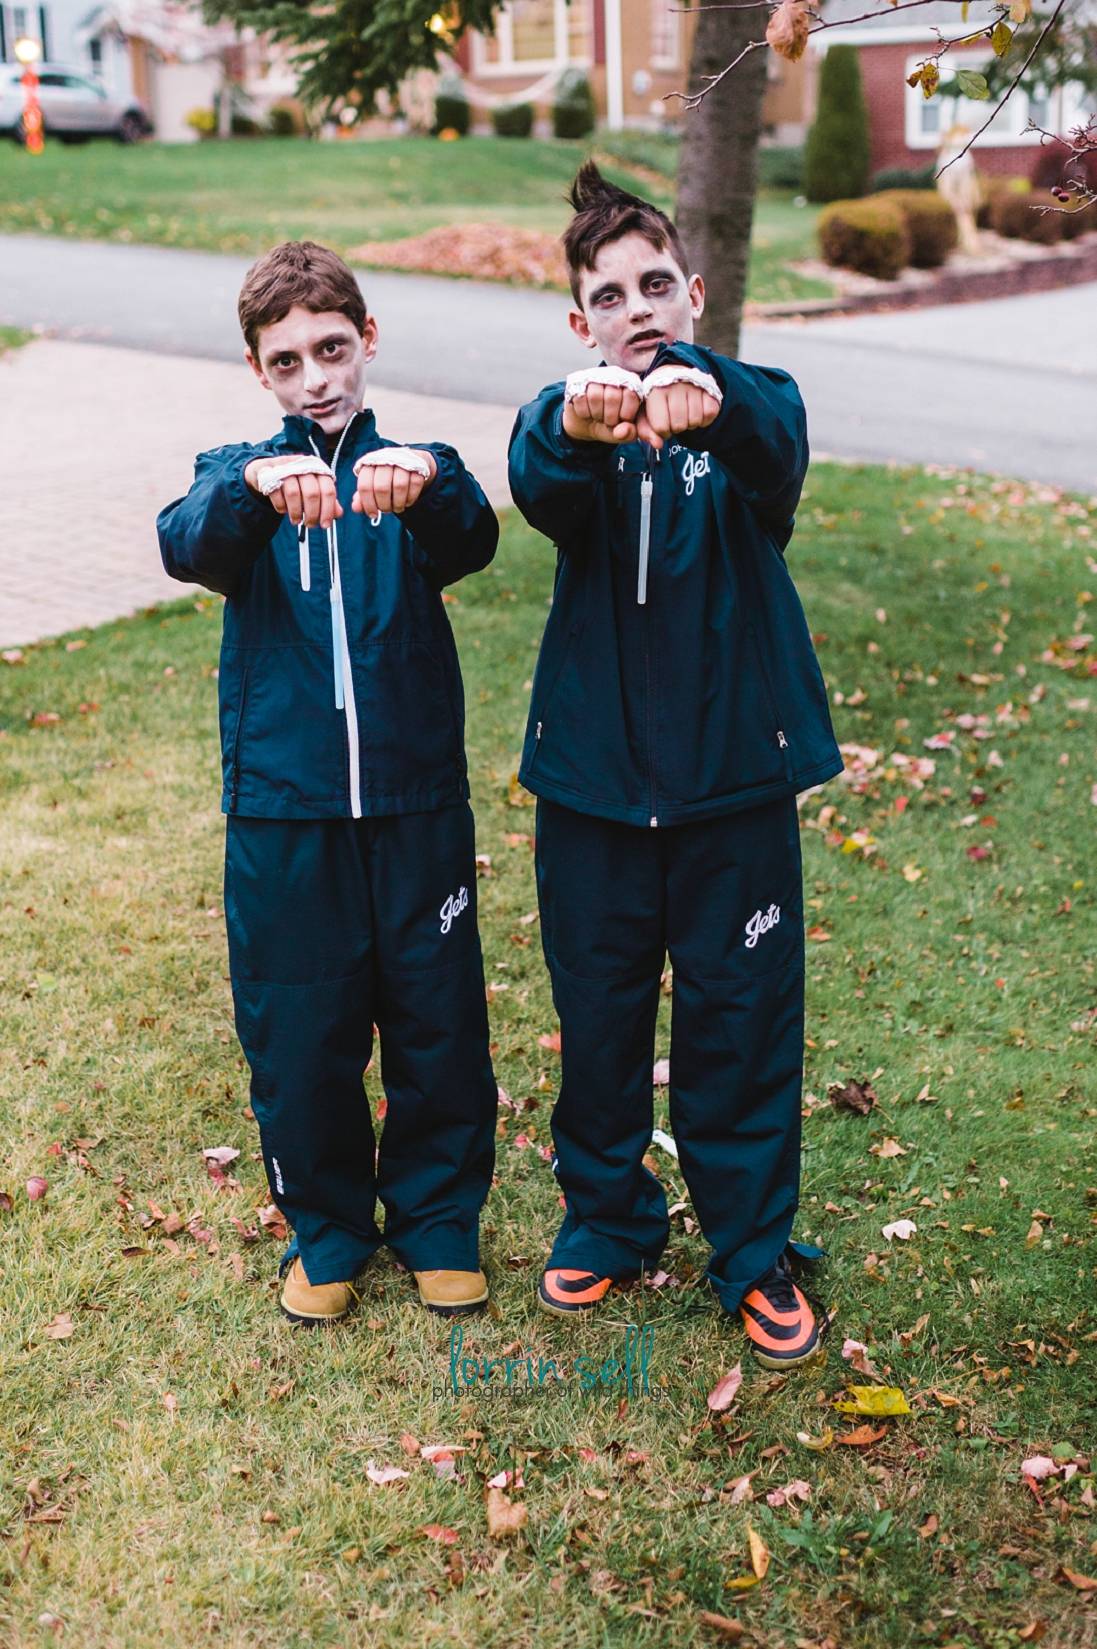 try these tips for taking amazing halloween pictures of your kids